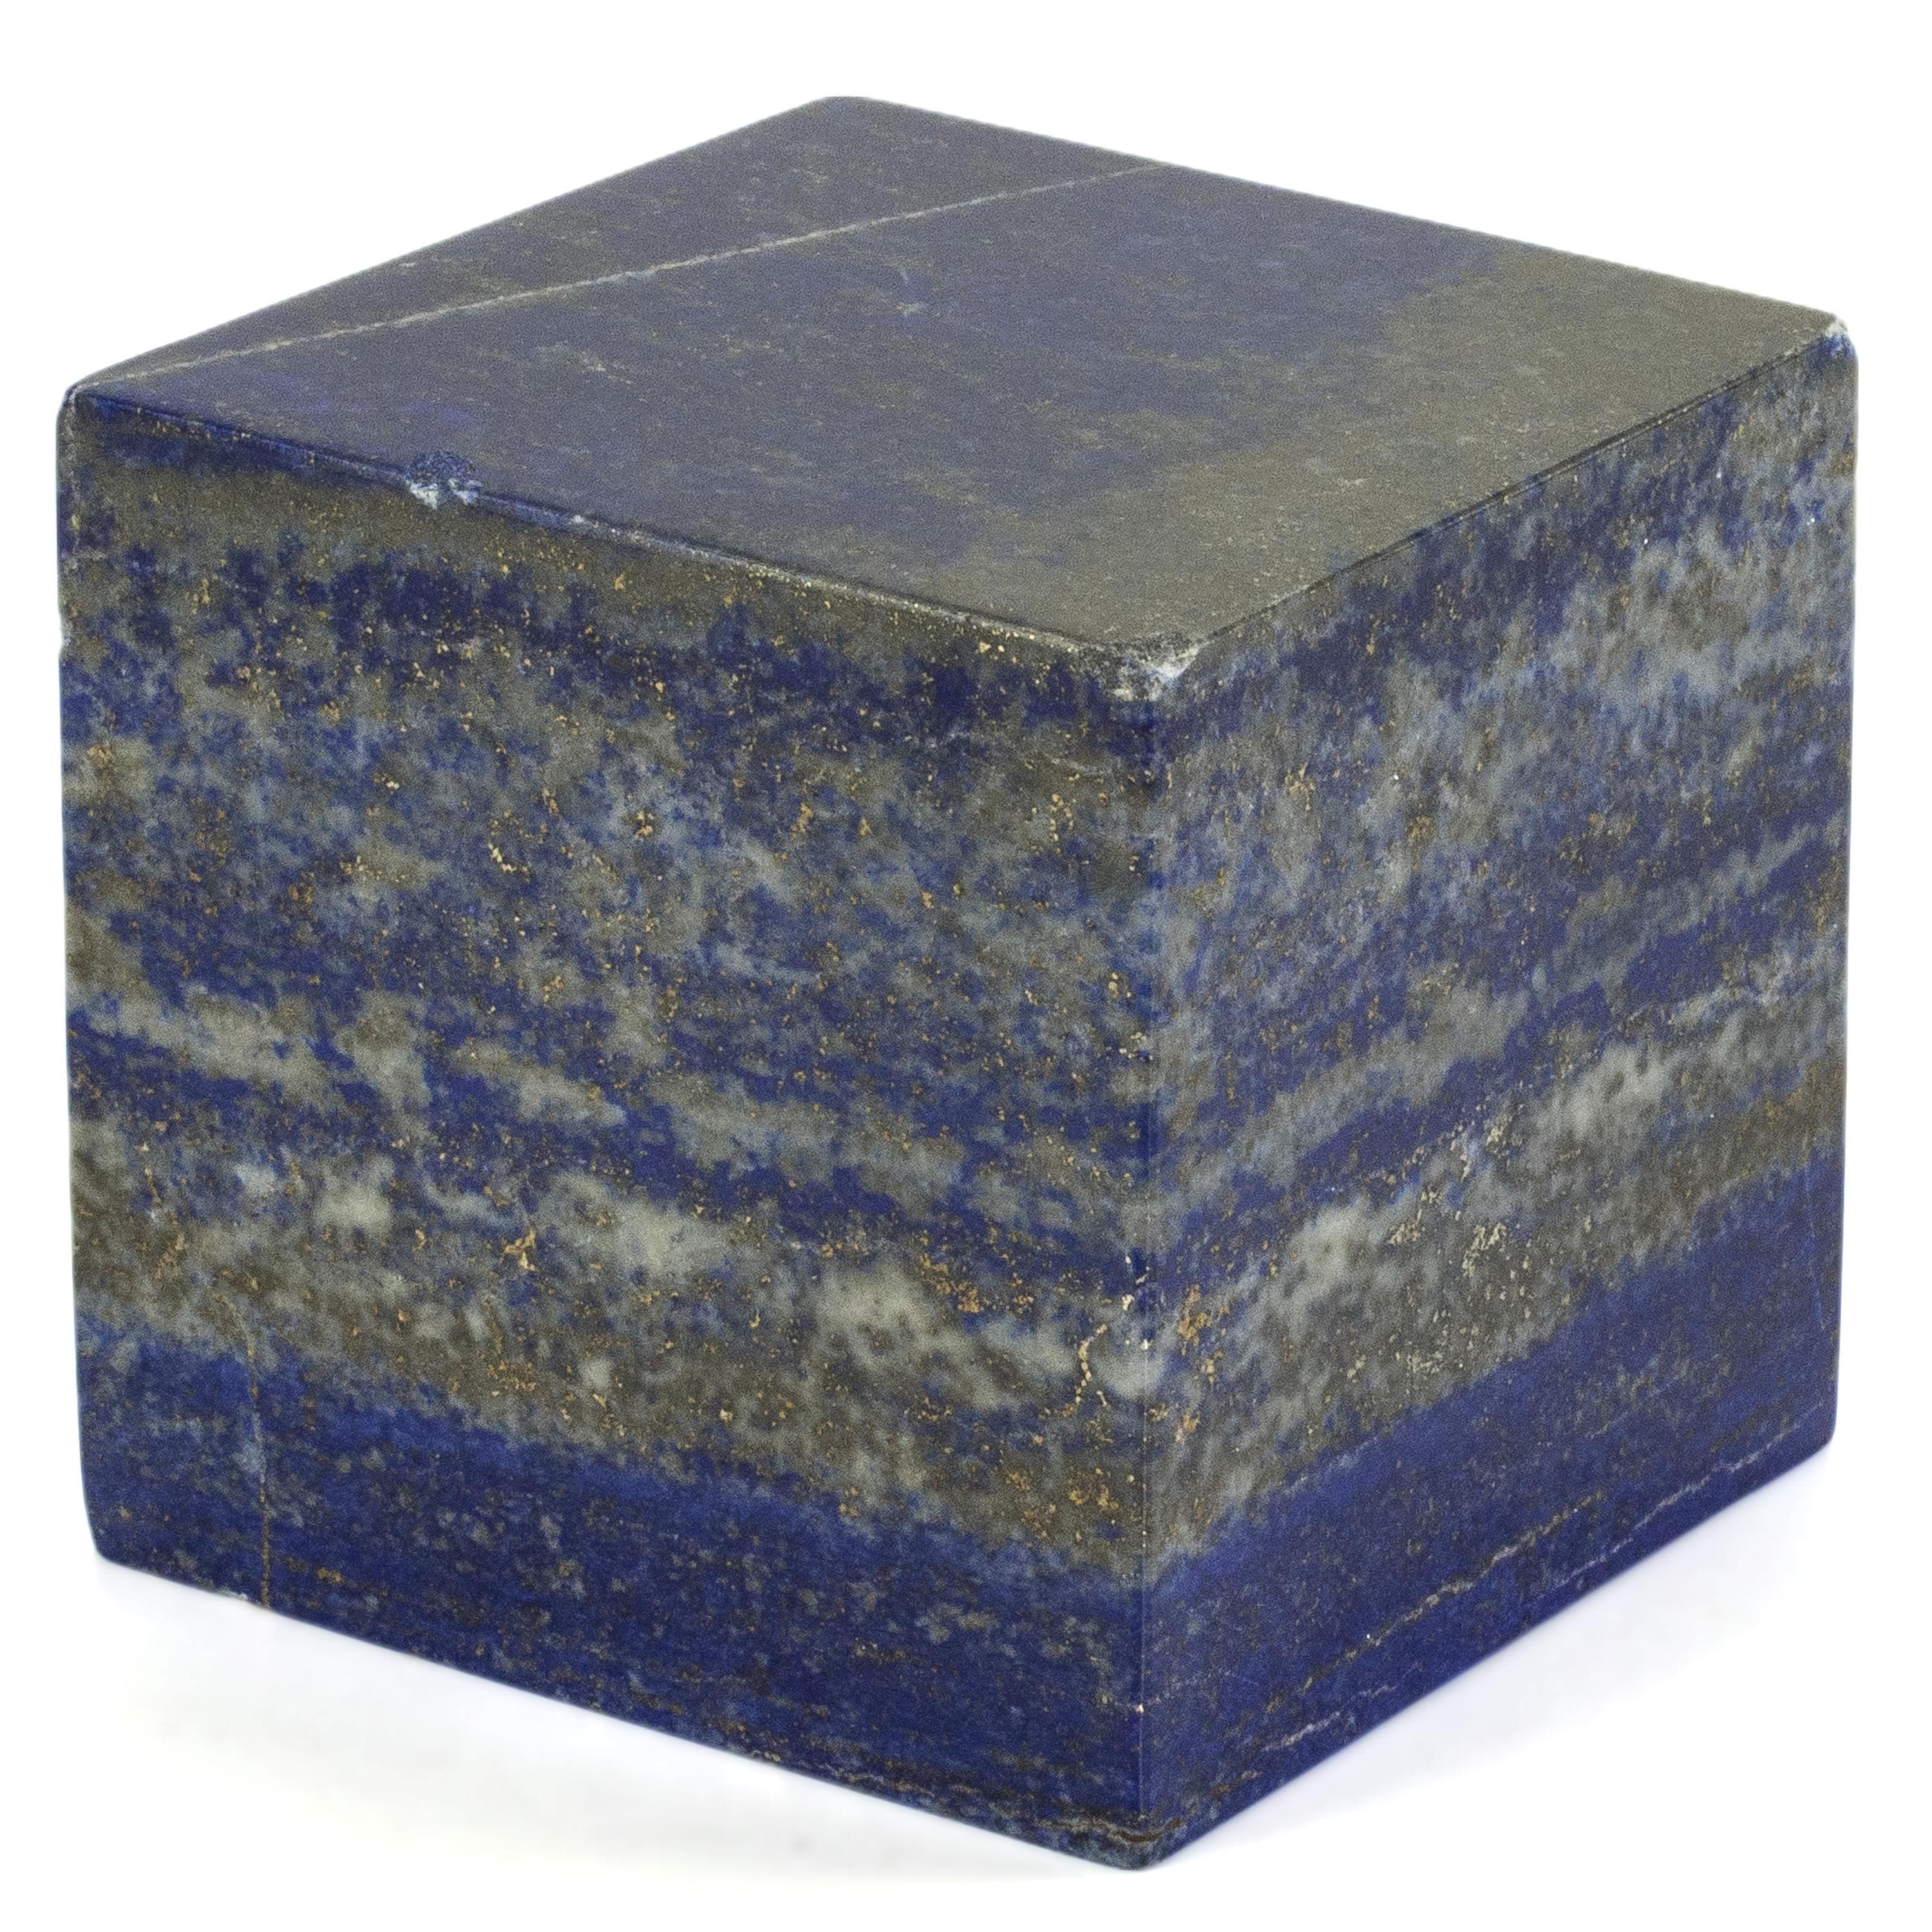 Kalifano Lapis Lapis Lazuil Freeform from Afghanistan - 680 g / 1.5 lbs LP800.005